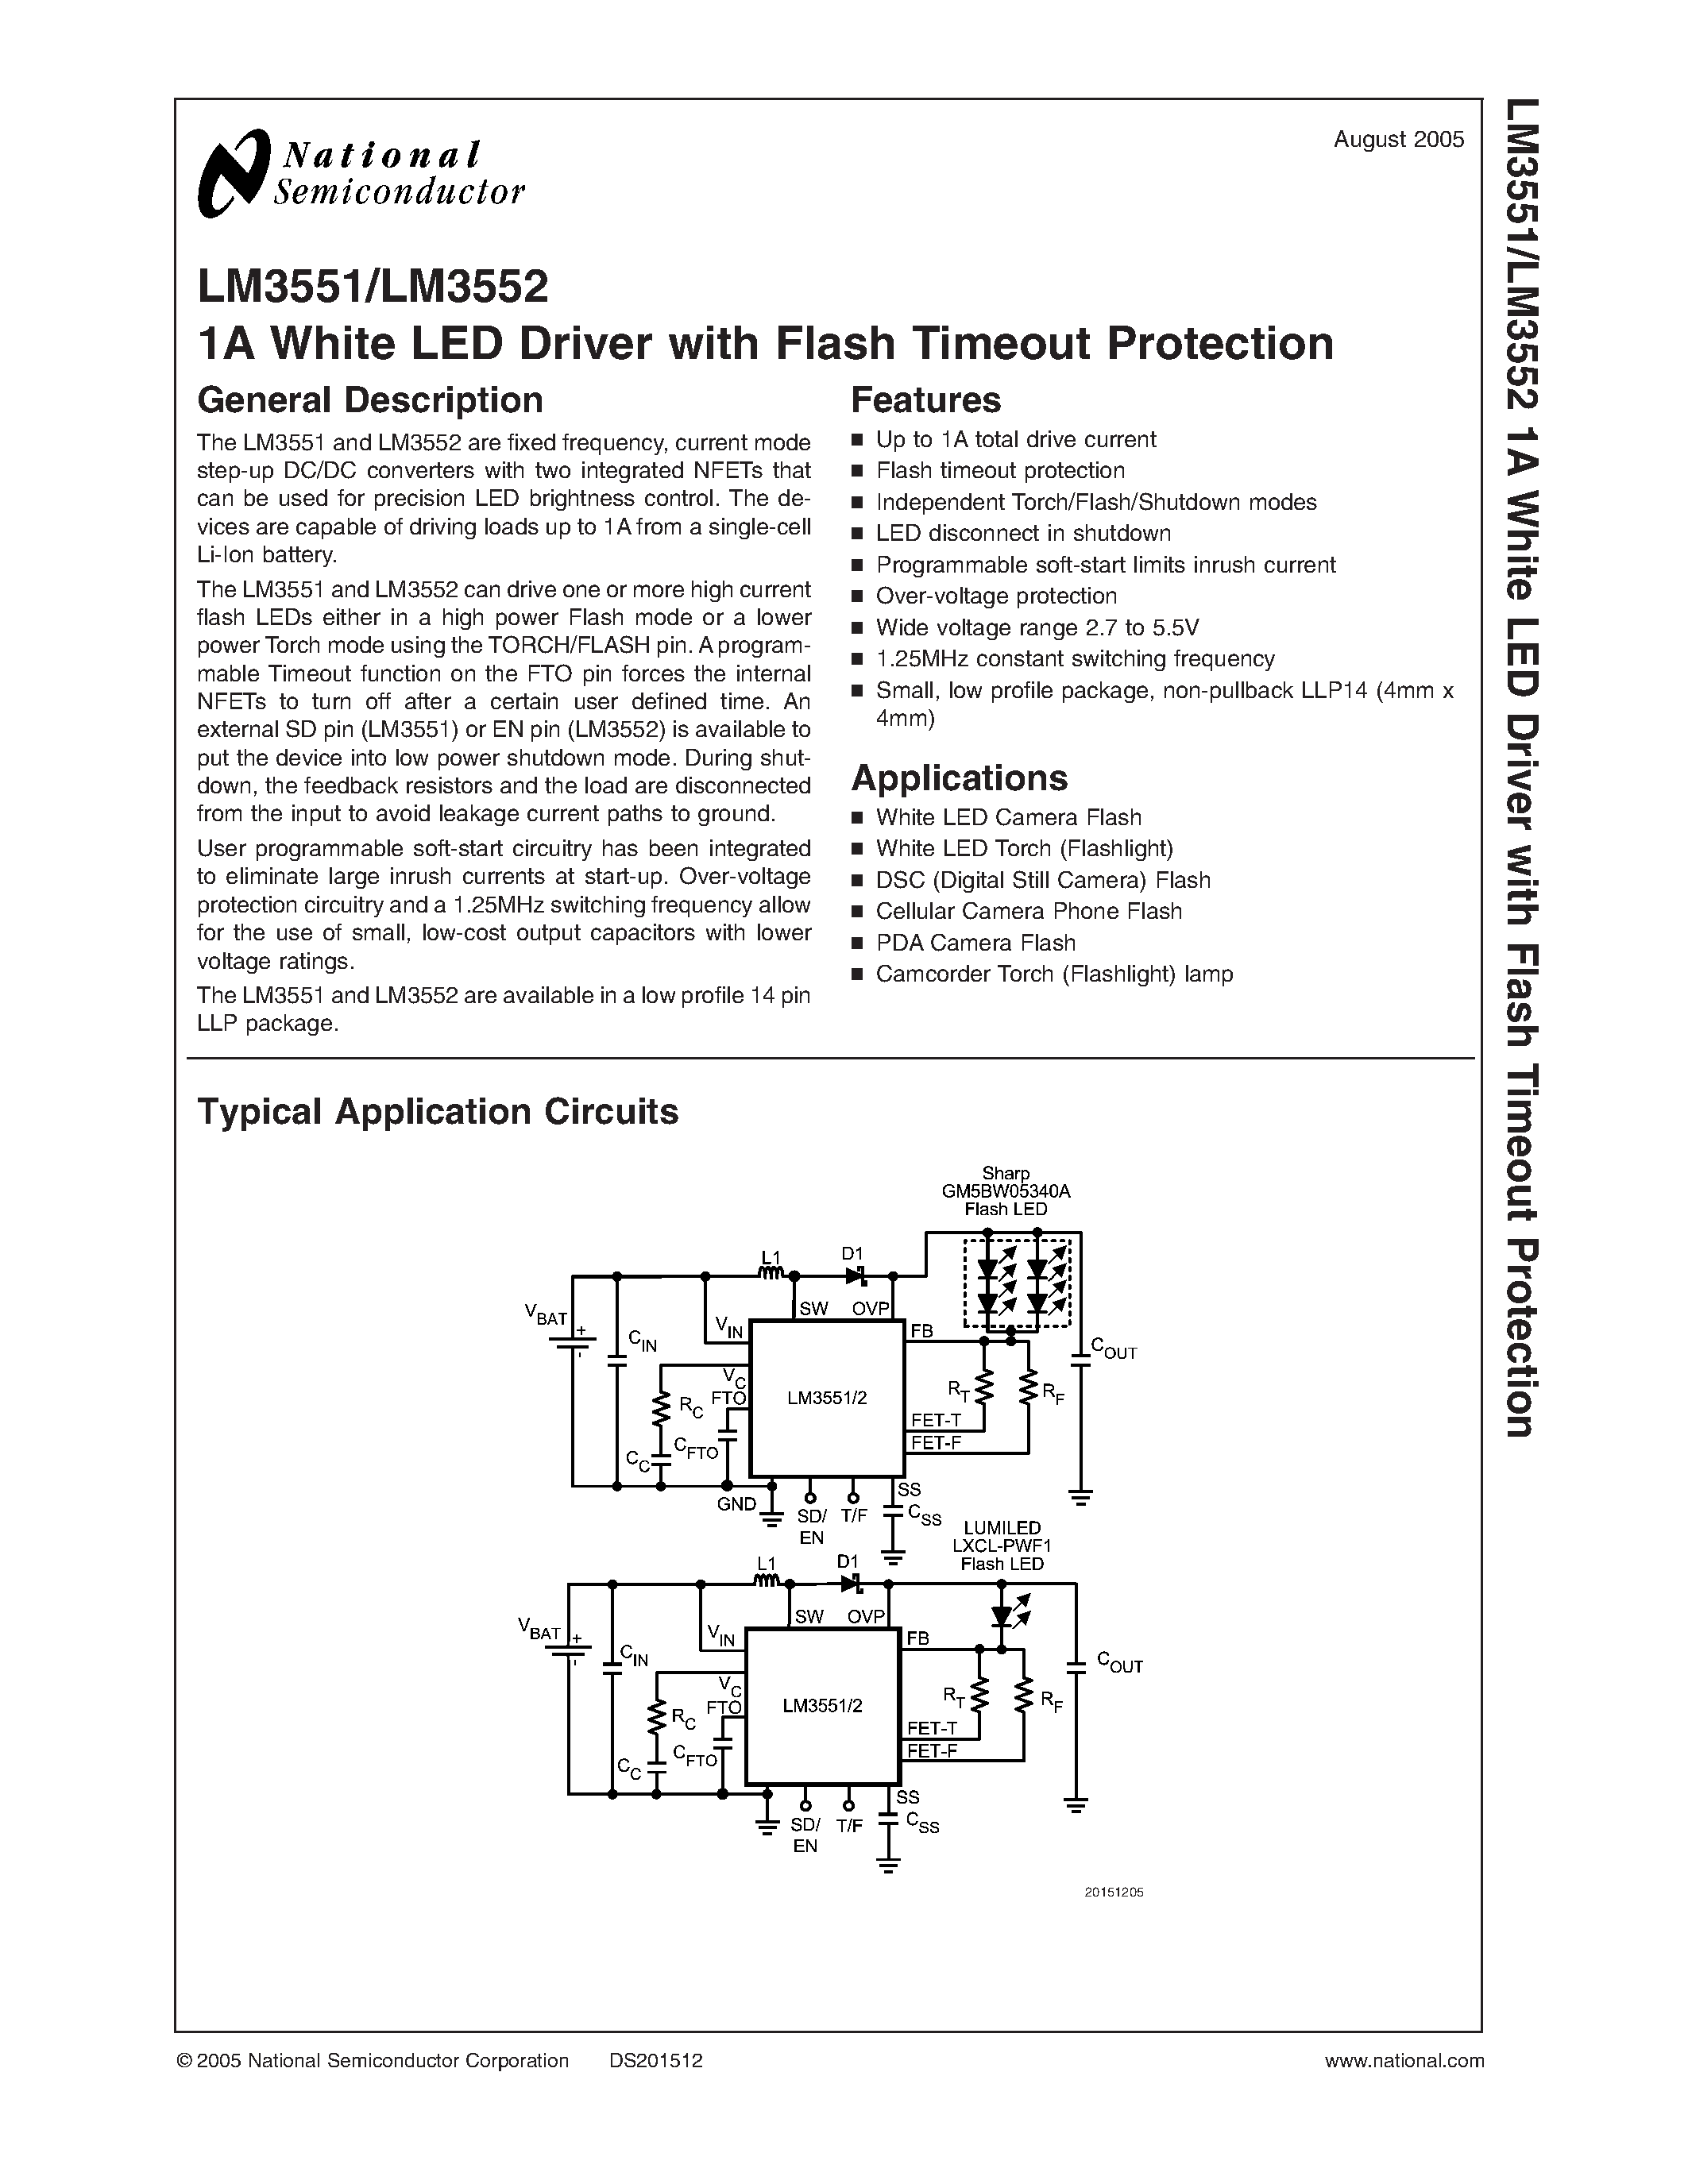 Datasheet LM3551 - (LM3551 / LM3552) 1A White LED Driver with Flash Timeout Protection page 1